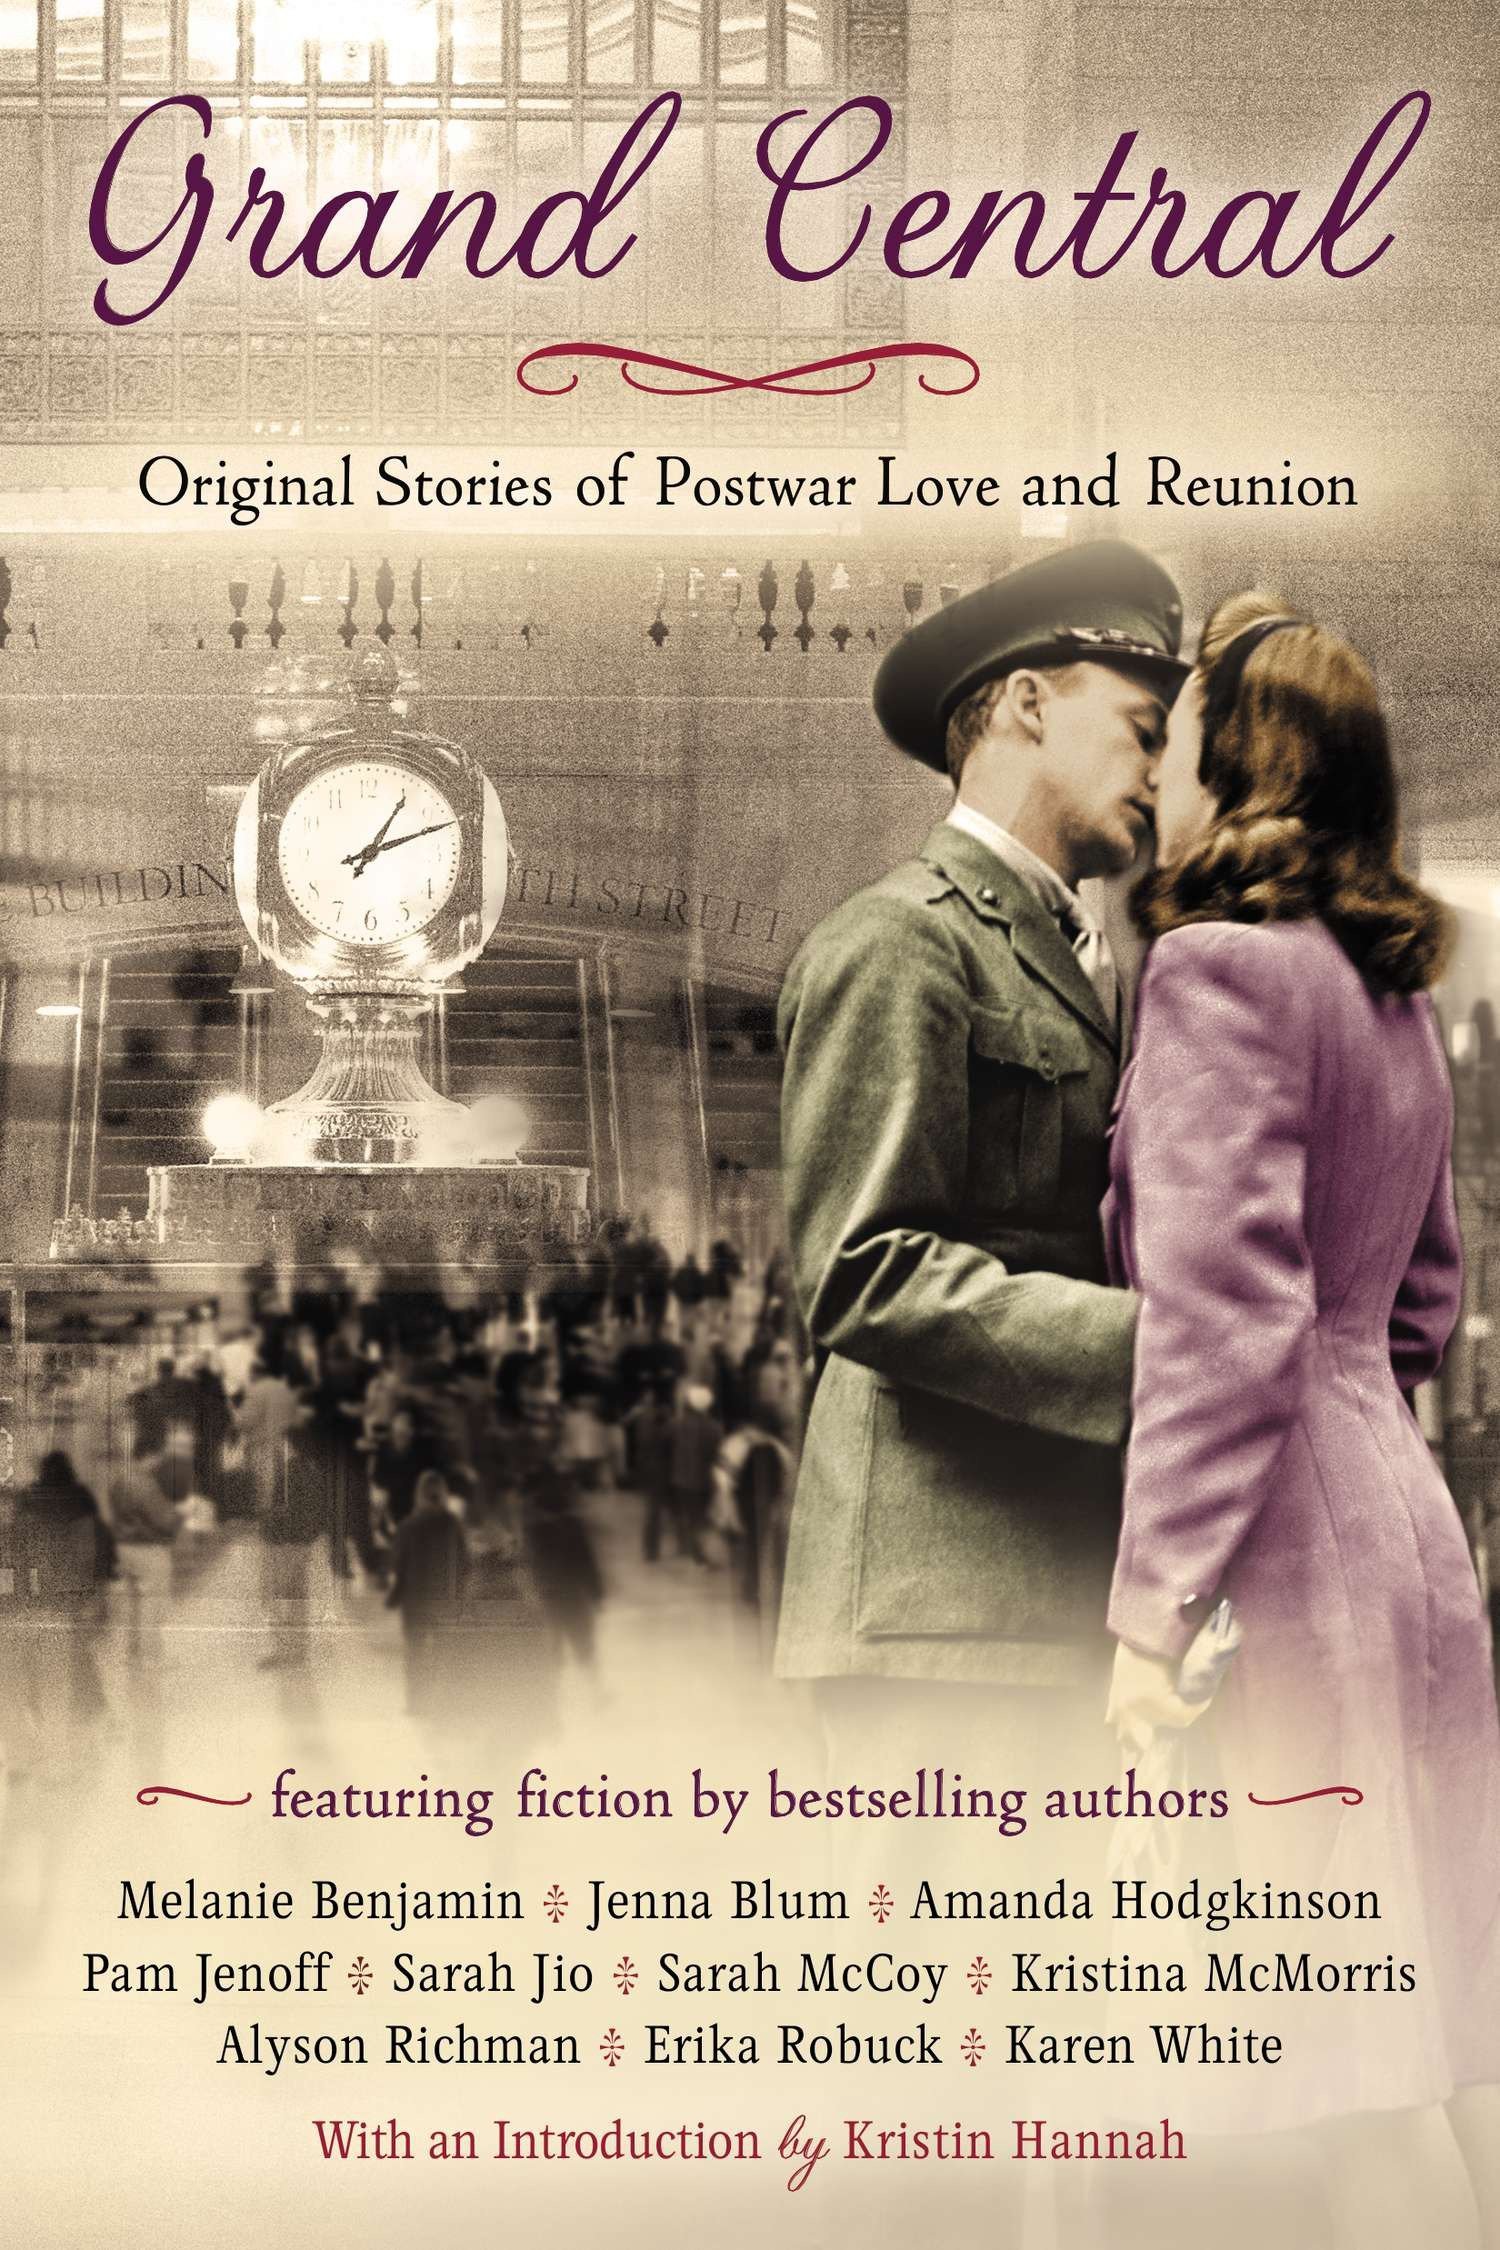 Cover of Grand Central: Original Stories of Postwar Love and Reunion